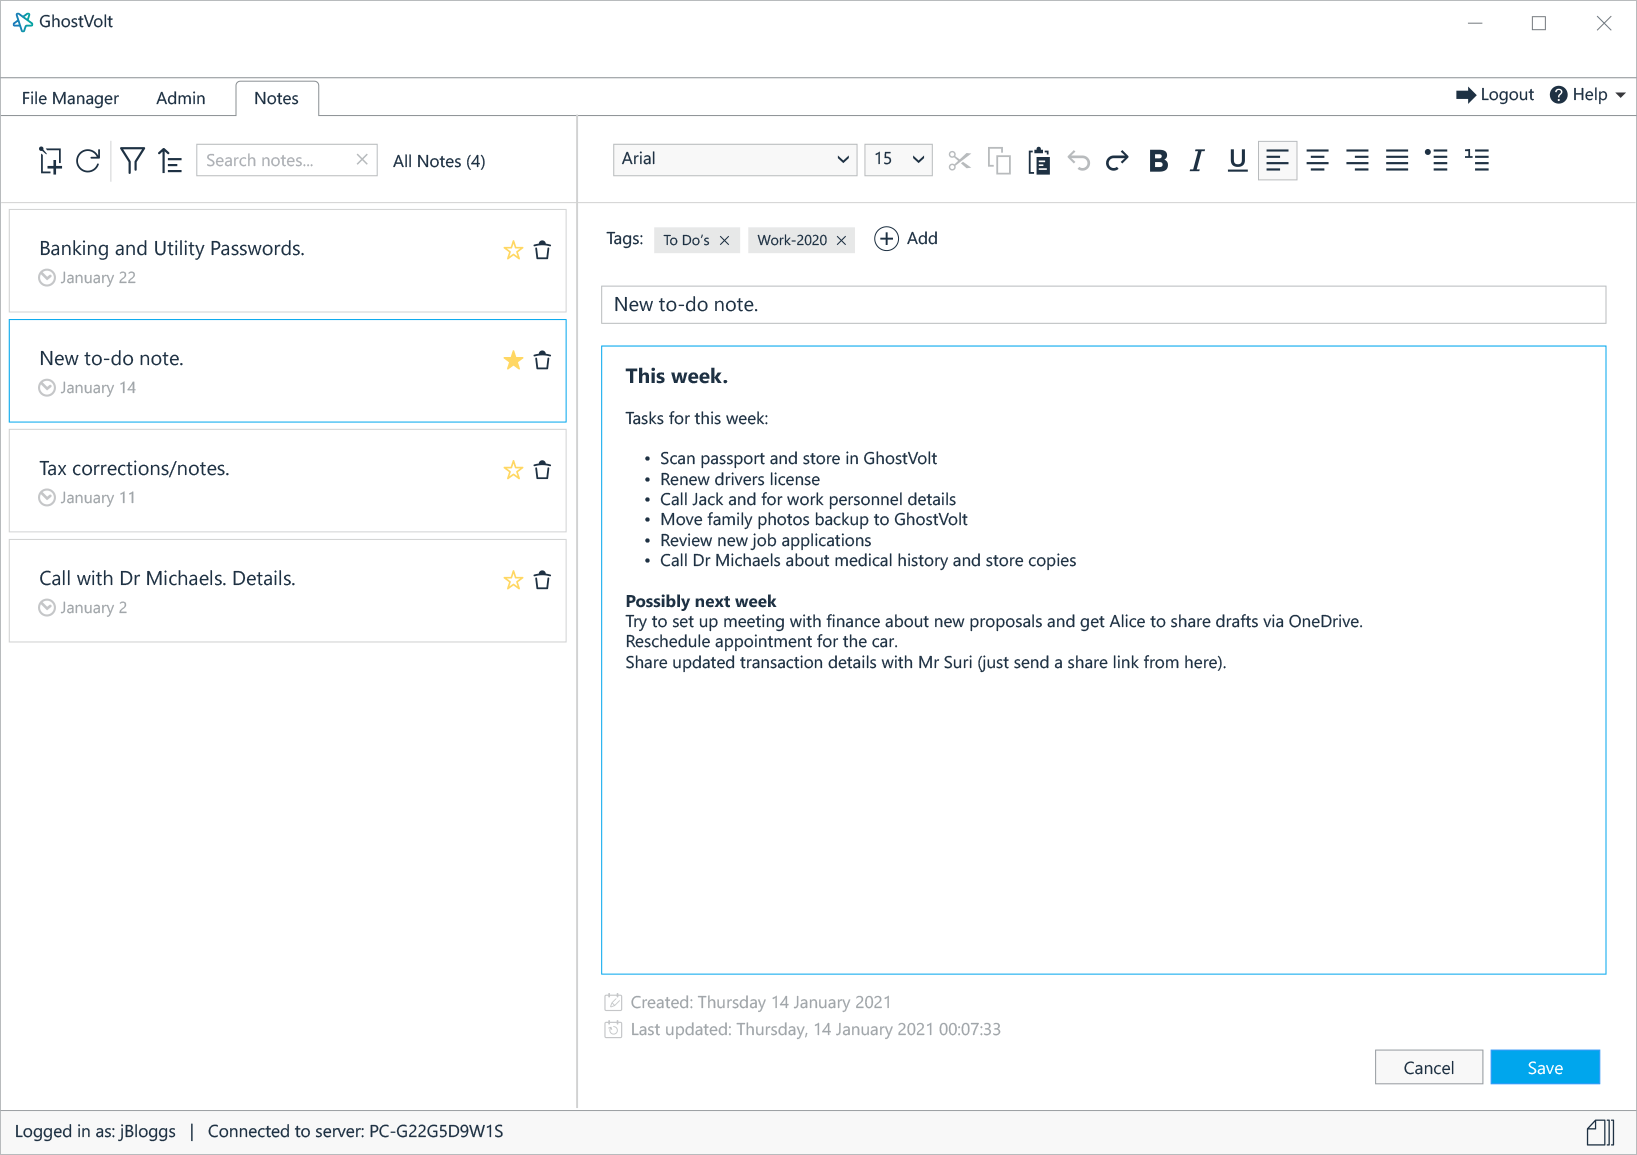 Creating a secure note than can be shared with other users